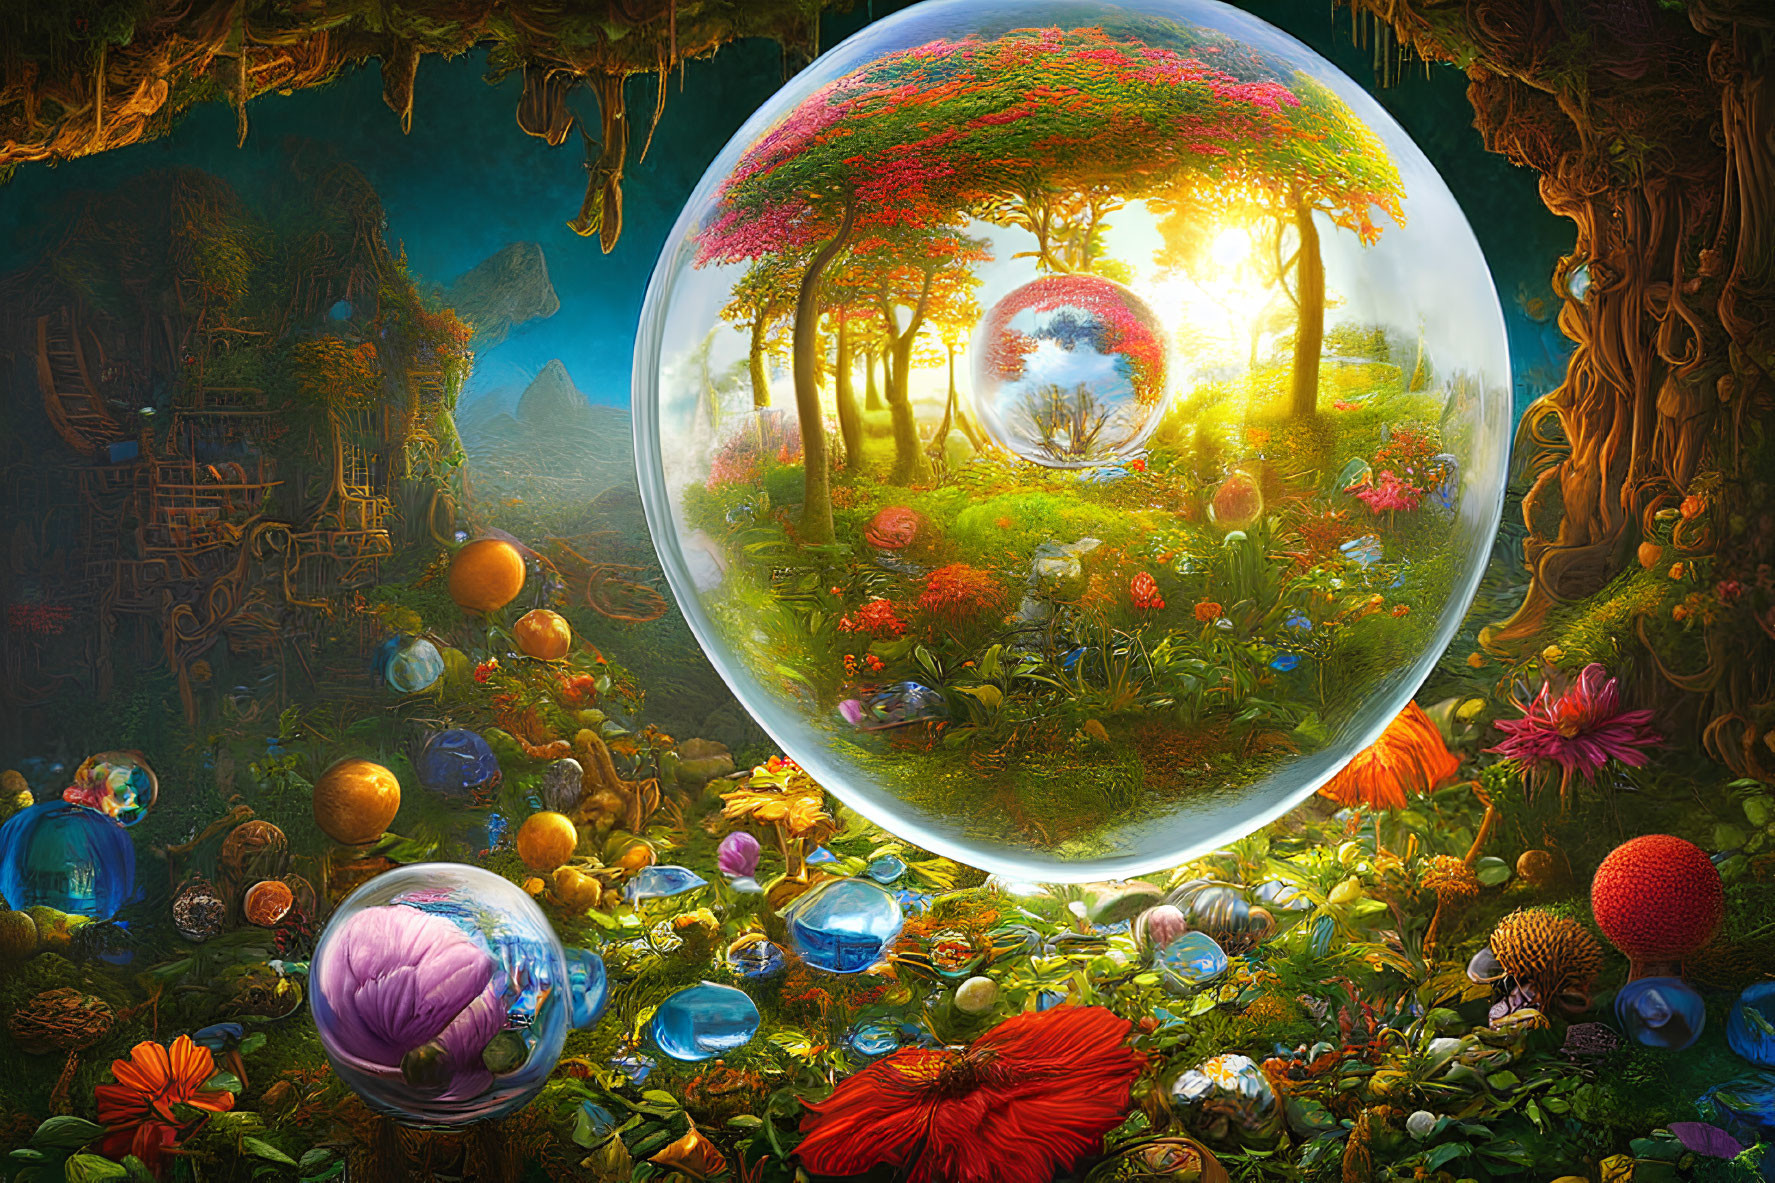 Surreal landscape with floating spheres and lush flora at twilight